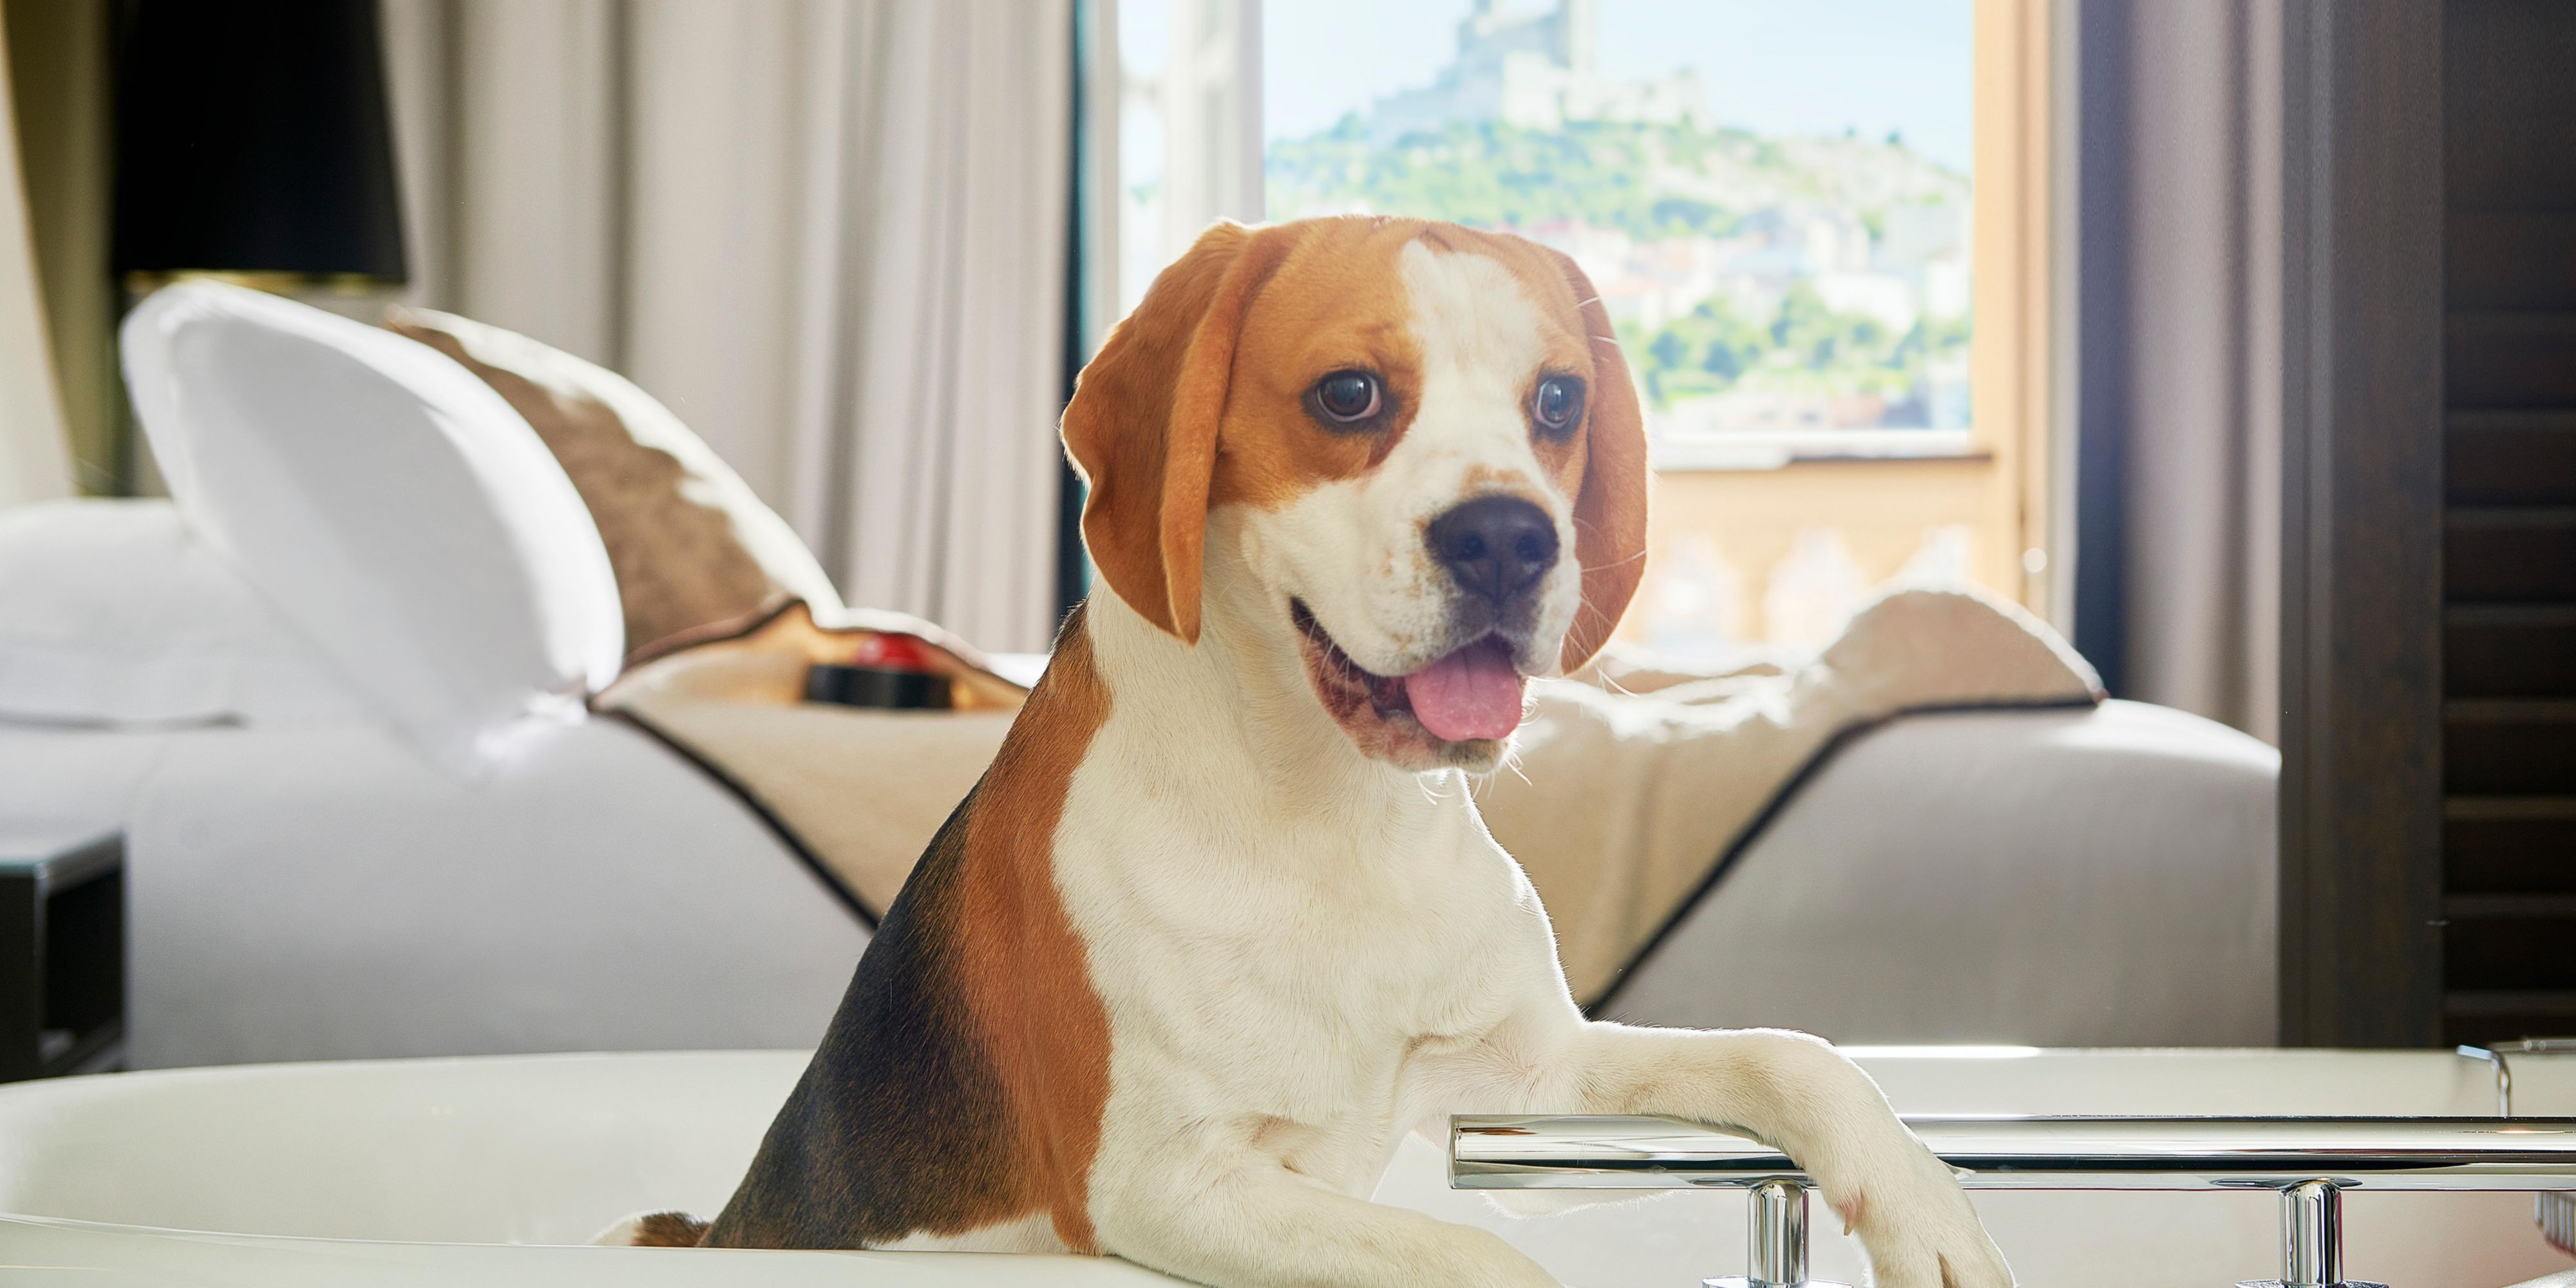 The InterContinental Marseille – Hotel Dieu is “Pet-friendly”! 
Throughout their stay, pets are welcome.
The “pet-friendly” offer includes a dog bowl, a blanket, a dirt-free set and a small dishes menu to choose from, available via room service.
The “Pet-friendly” offer is available from 55€, for dogs under 6kg.